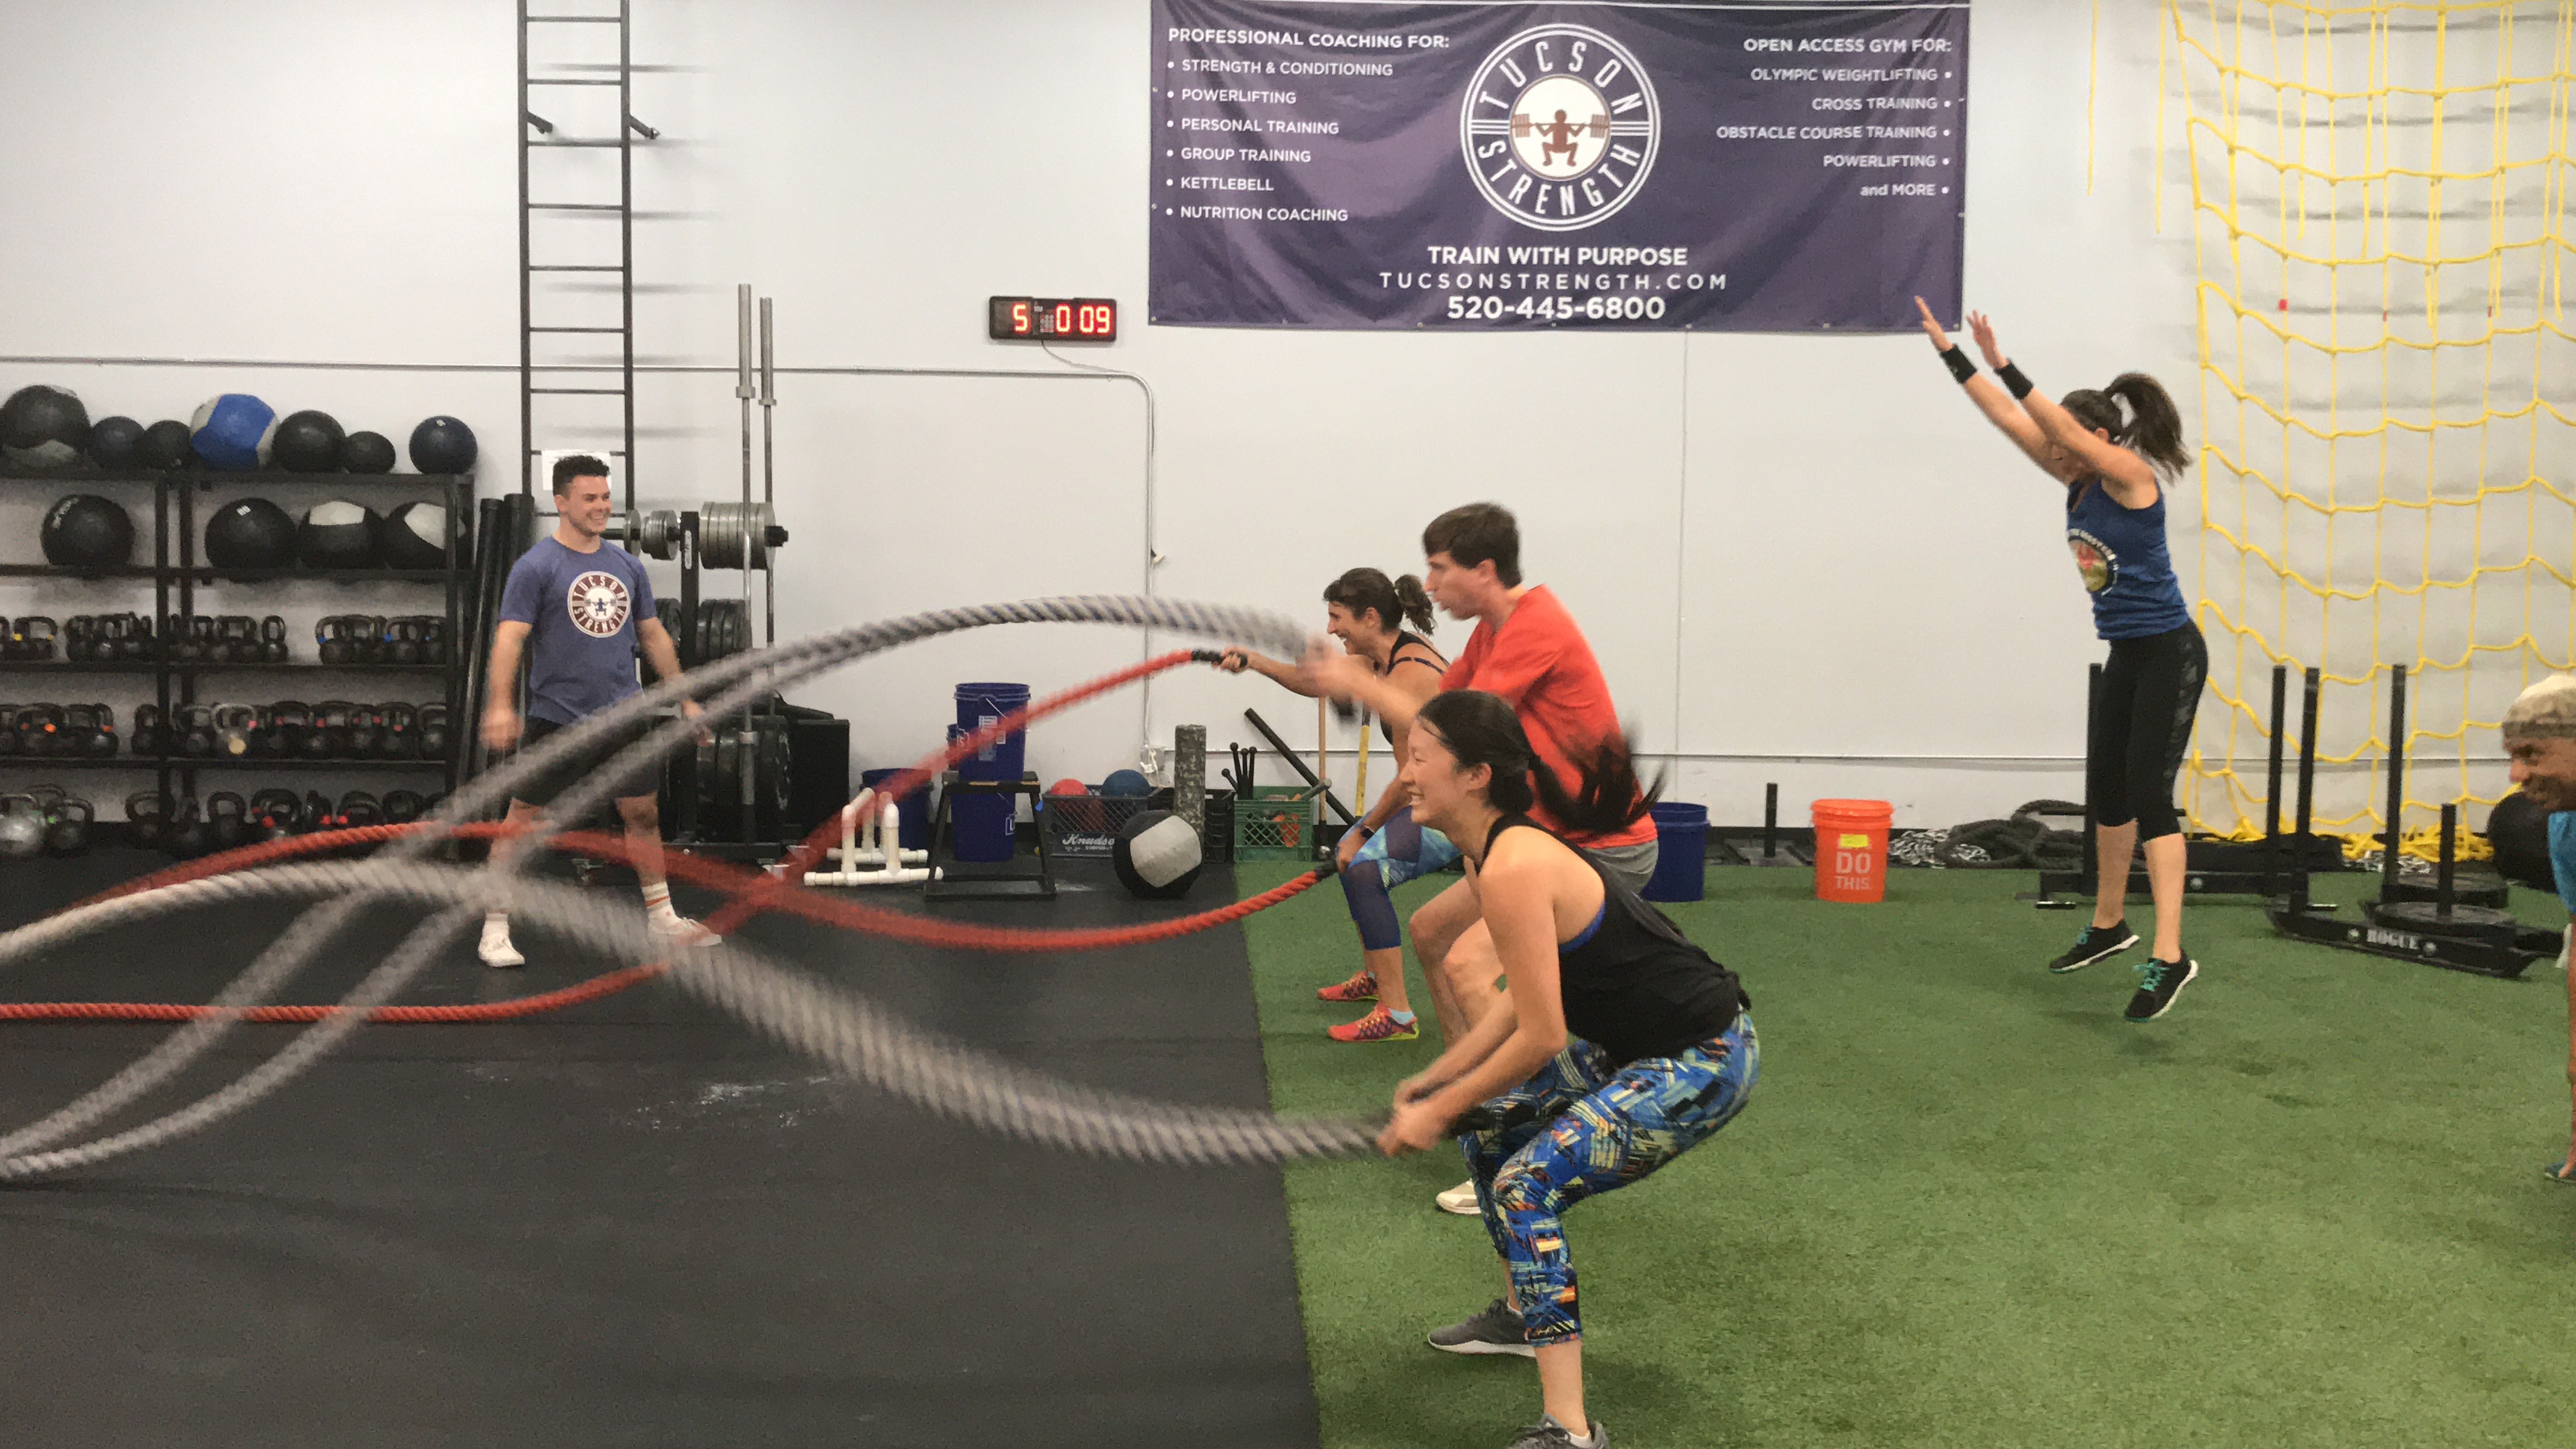 Group Training Tucson Fitness gyms